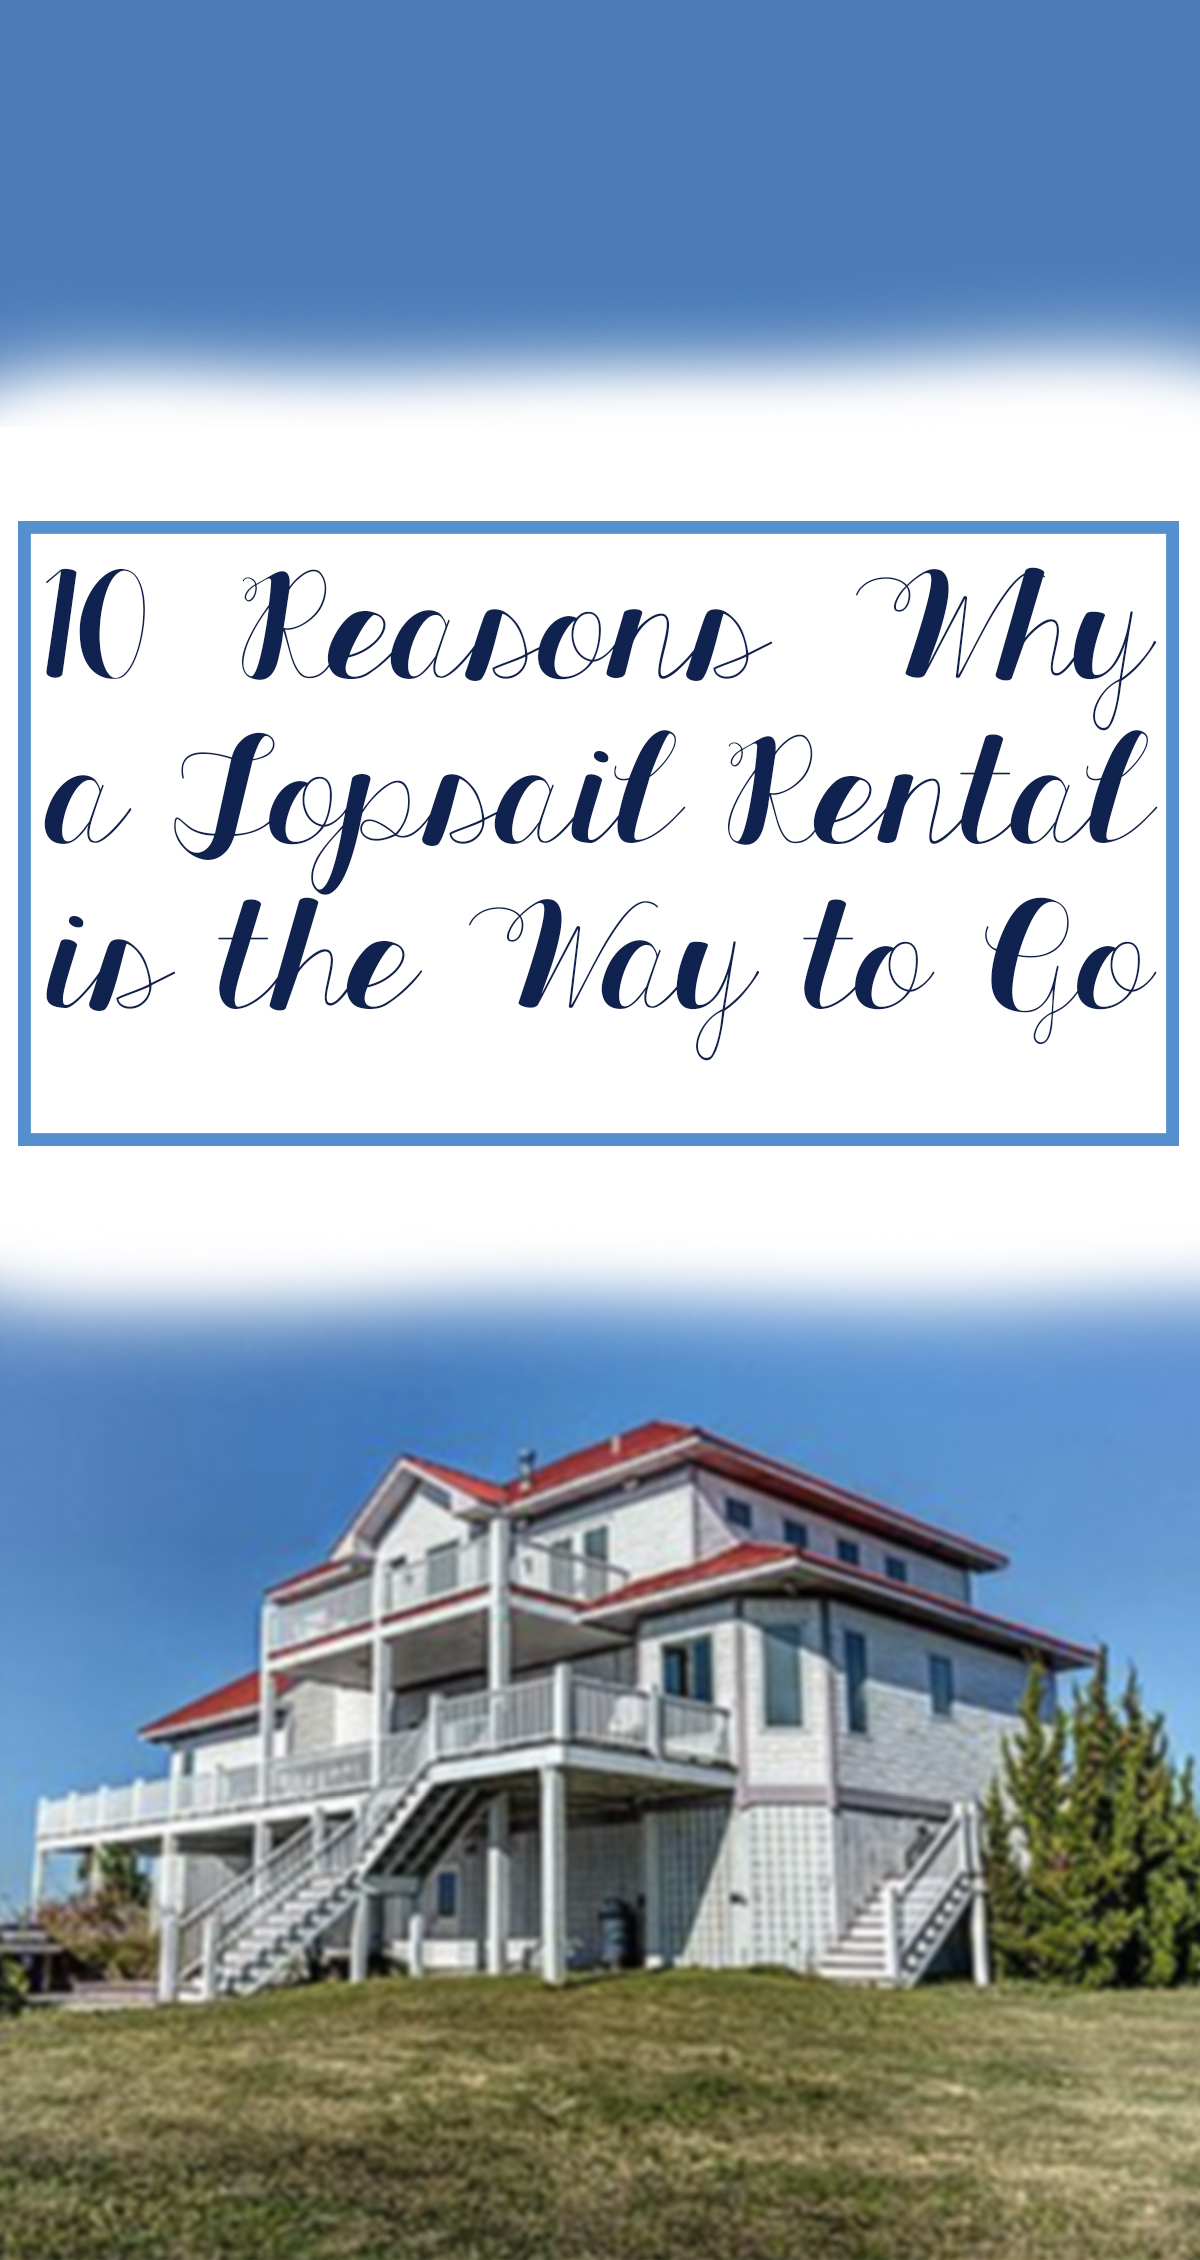 10 Reasons Why a Topsail Rental is the Way to Go Pin